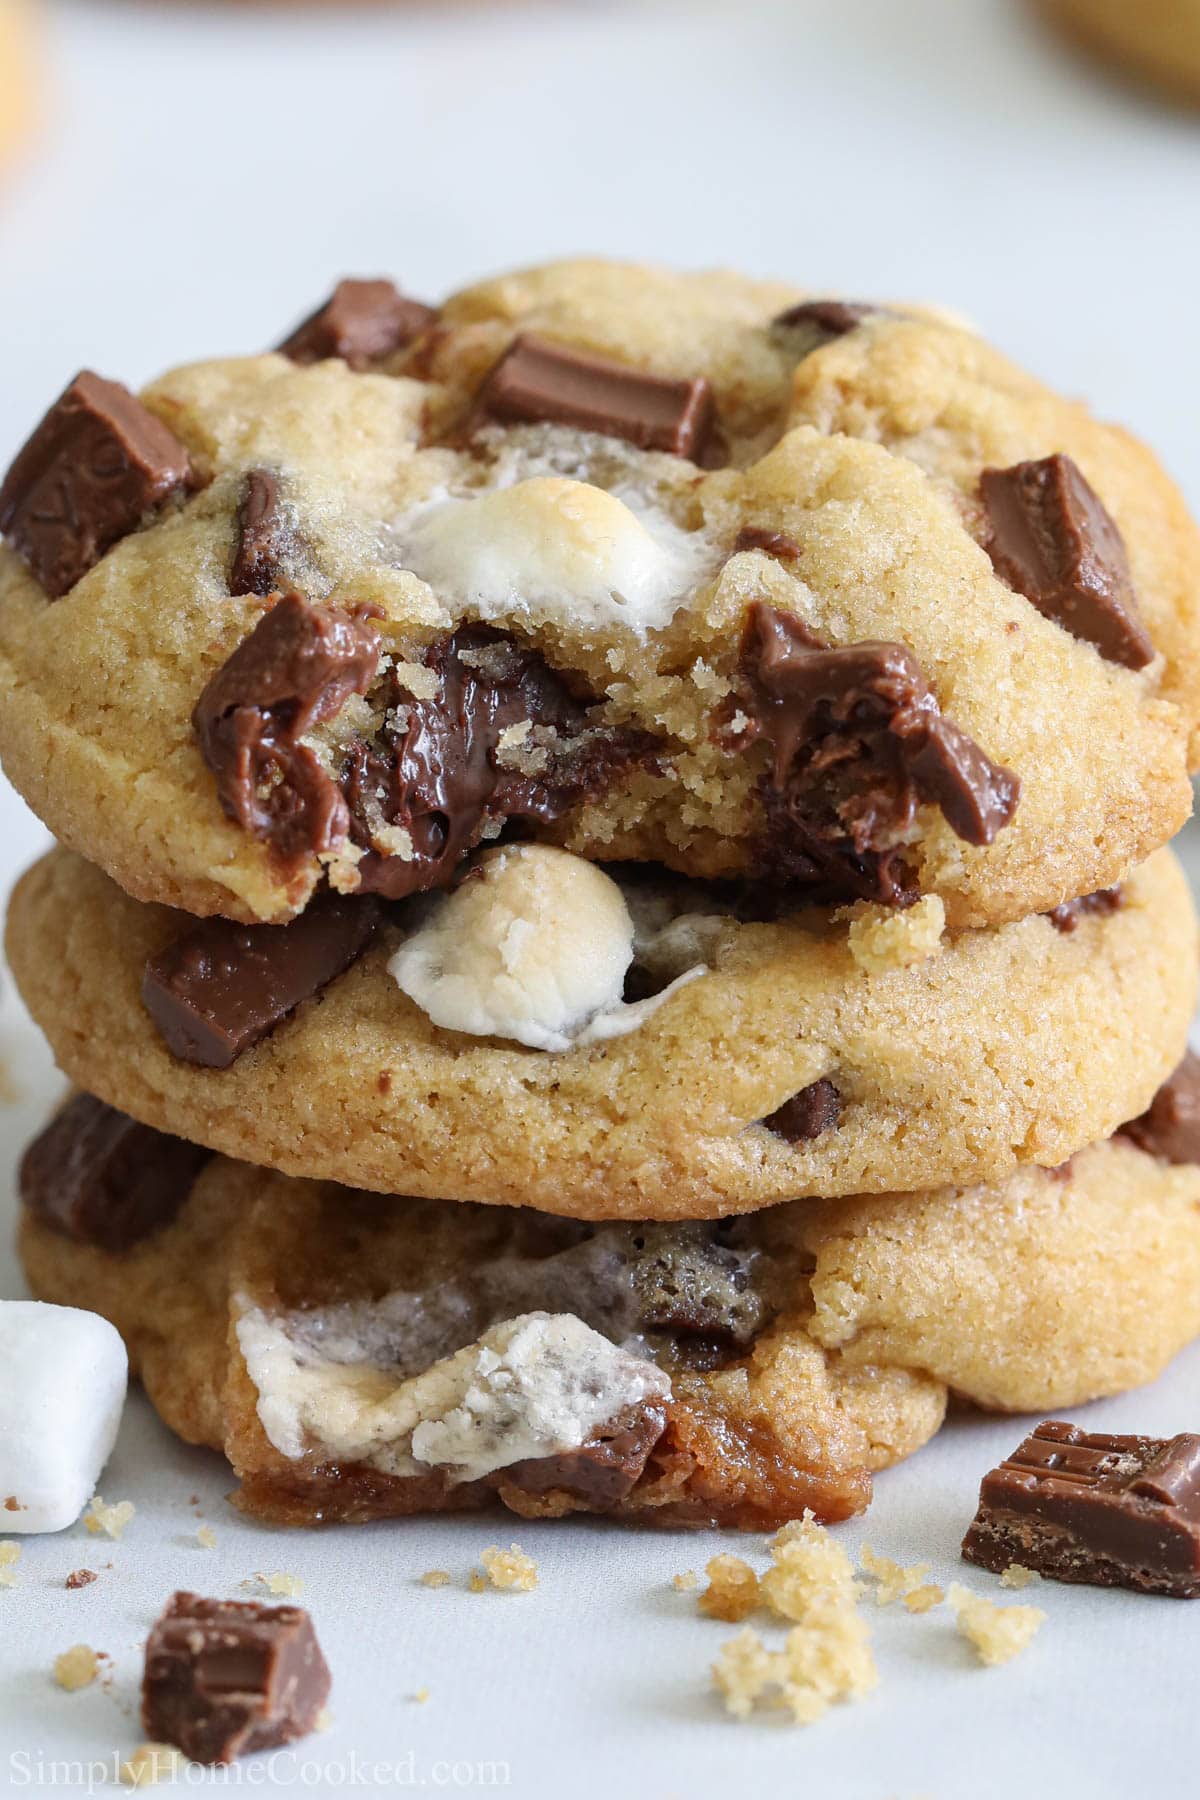 Verical image of S'mores Cookies stacked with a bite missing